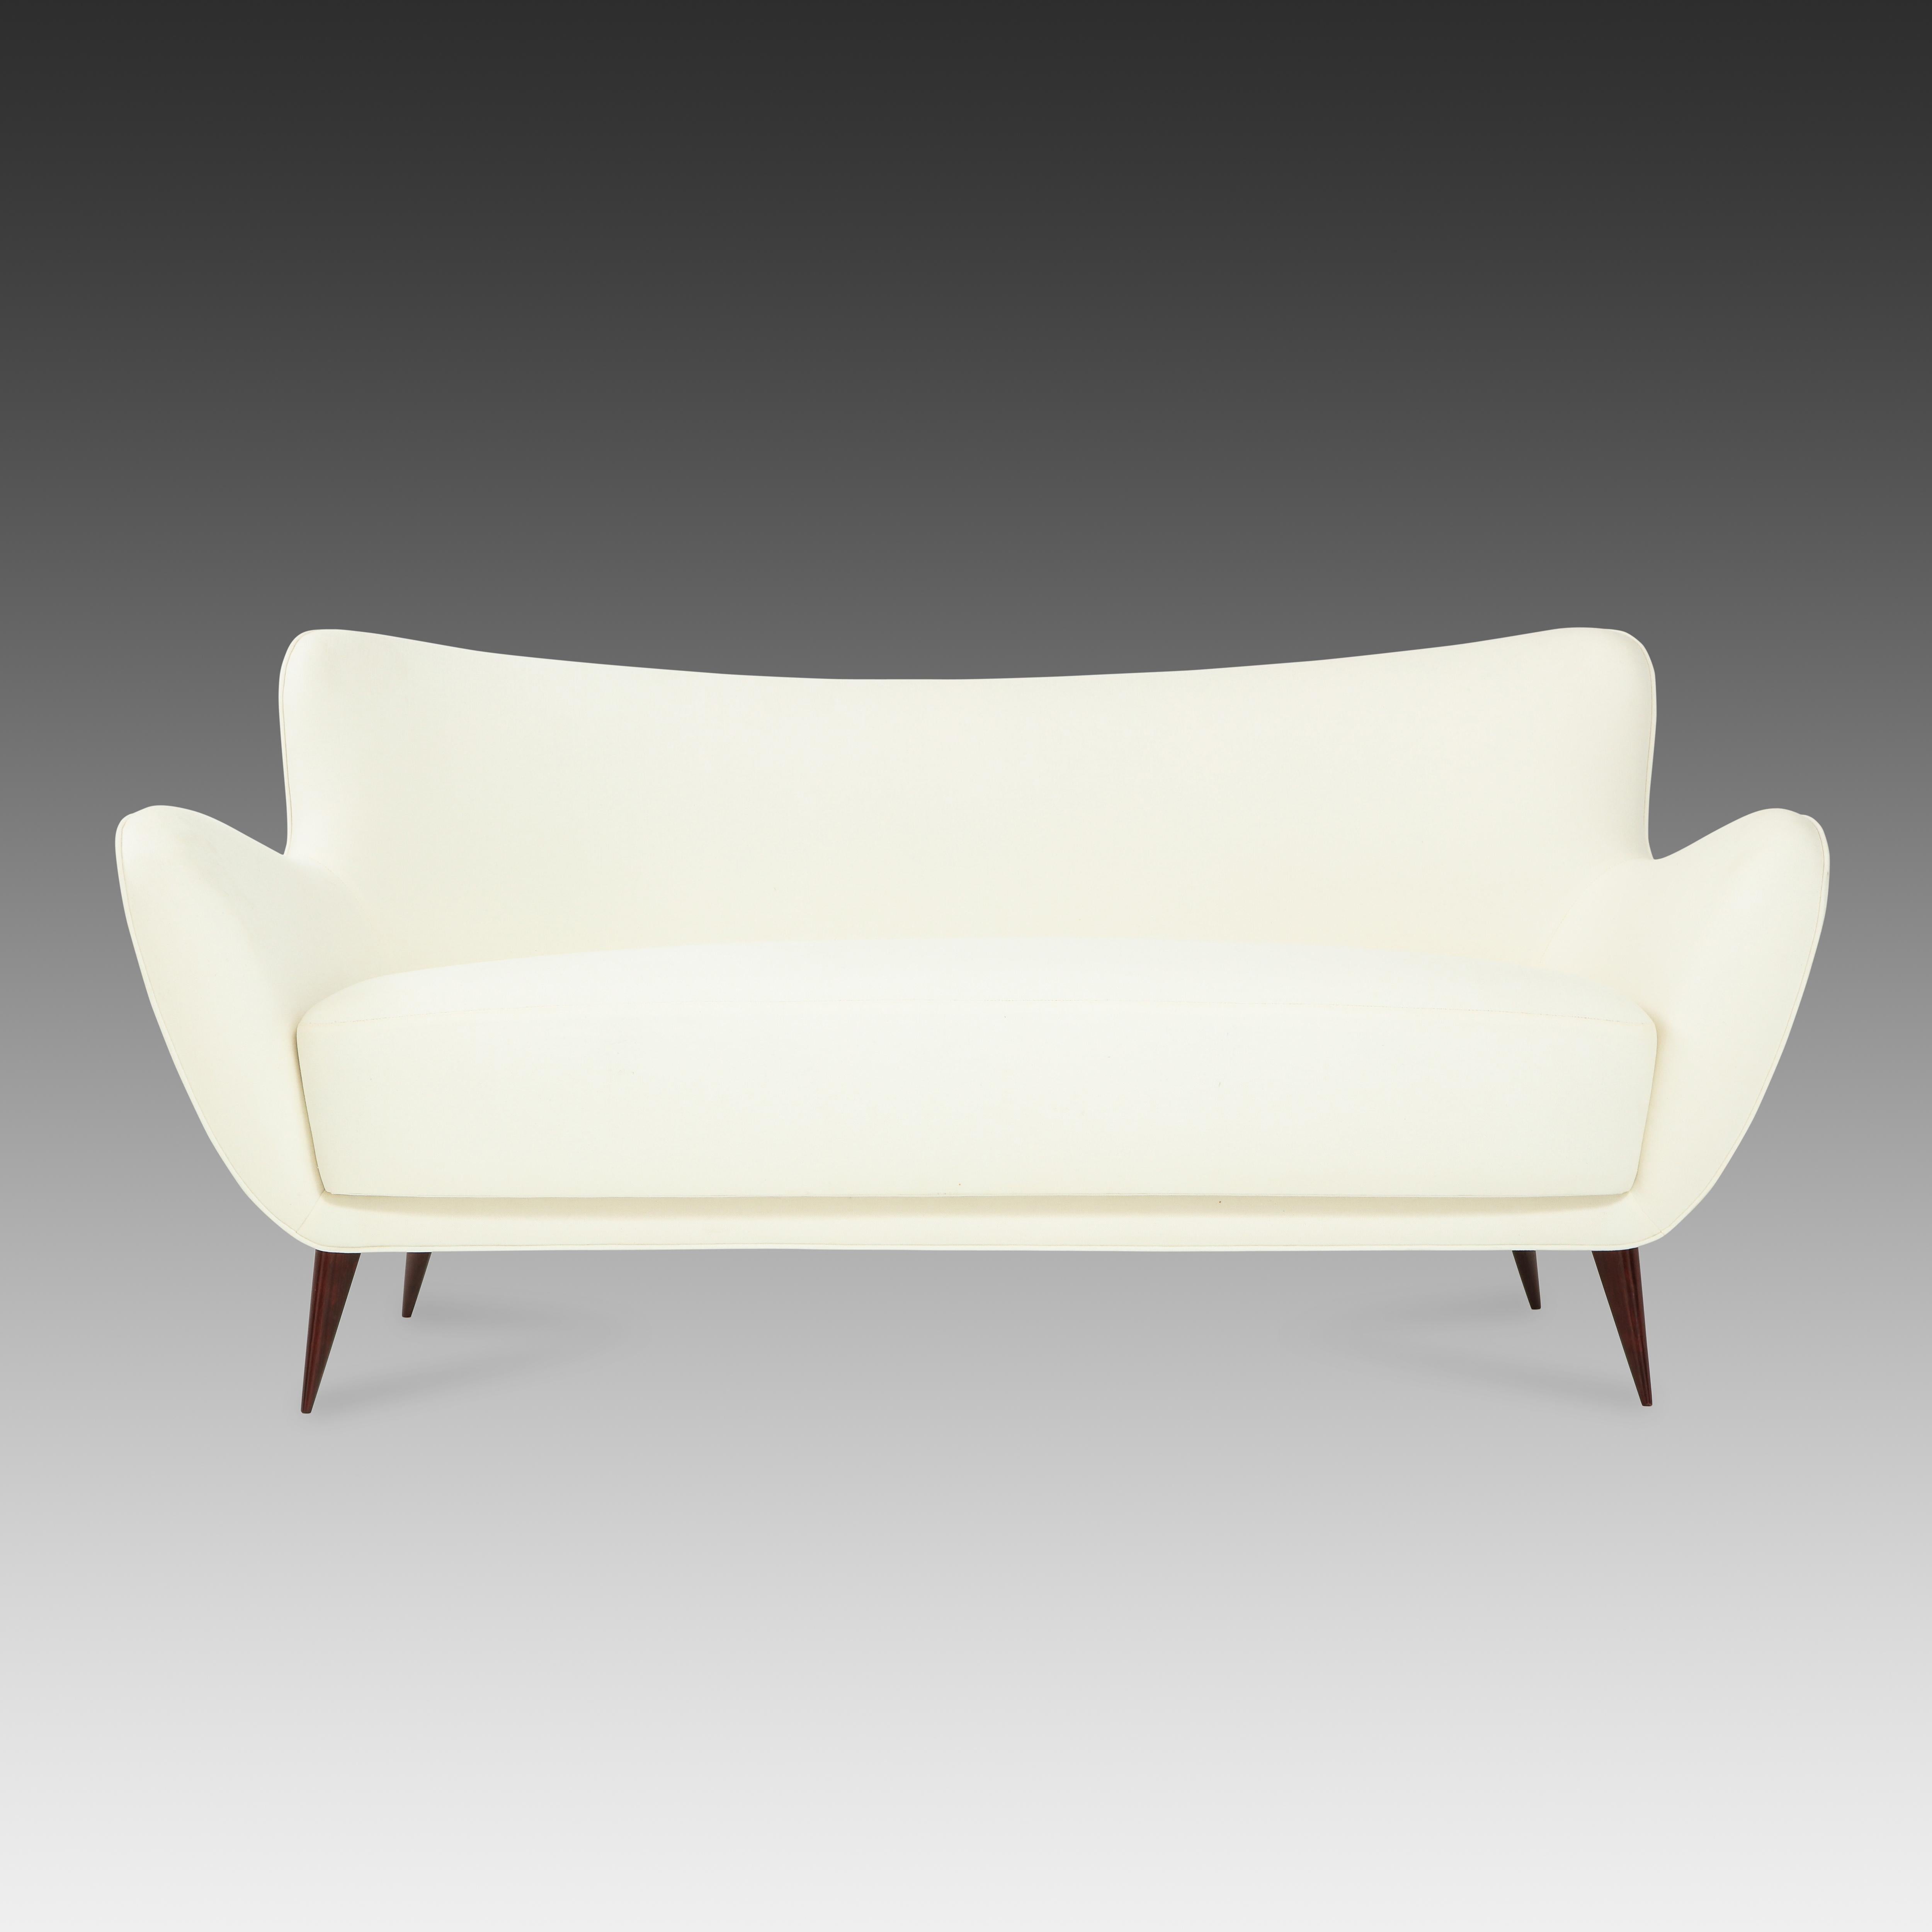 Guglielmo for I.S.A. Bergamo elegant and sculptural 'Perla' sofa with slightly curved back and gently outstretched arms ending in signature sharply tapered walnut legs, Italy, 1950s. 
Fully restored and newly reupholstered in off-white cotton linen